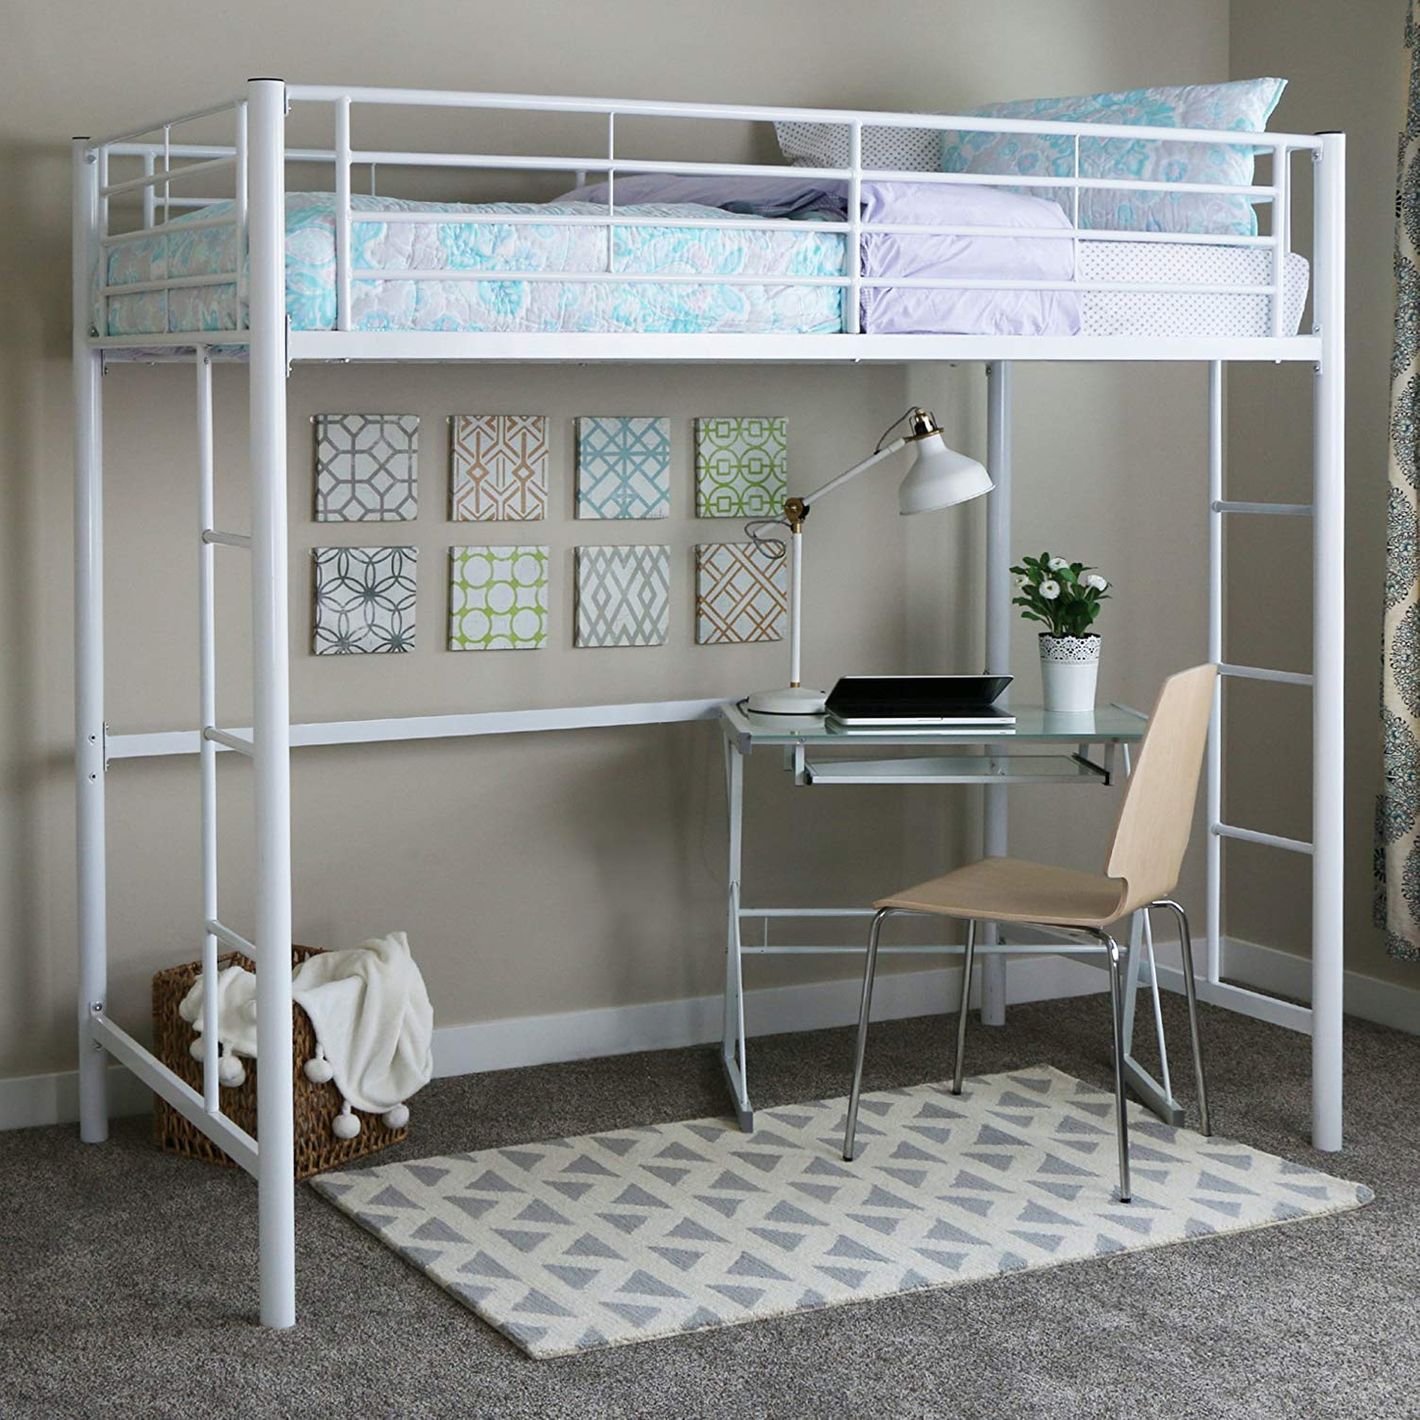 8 Best Loft Beds 2019 The Strategist, Bunk Bed With Table On Bottom